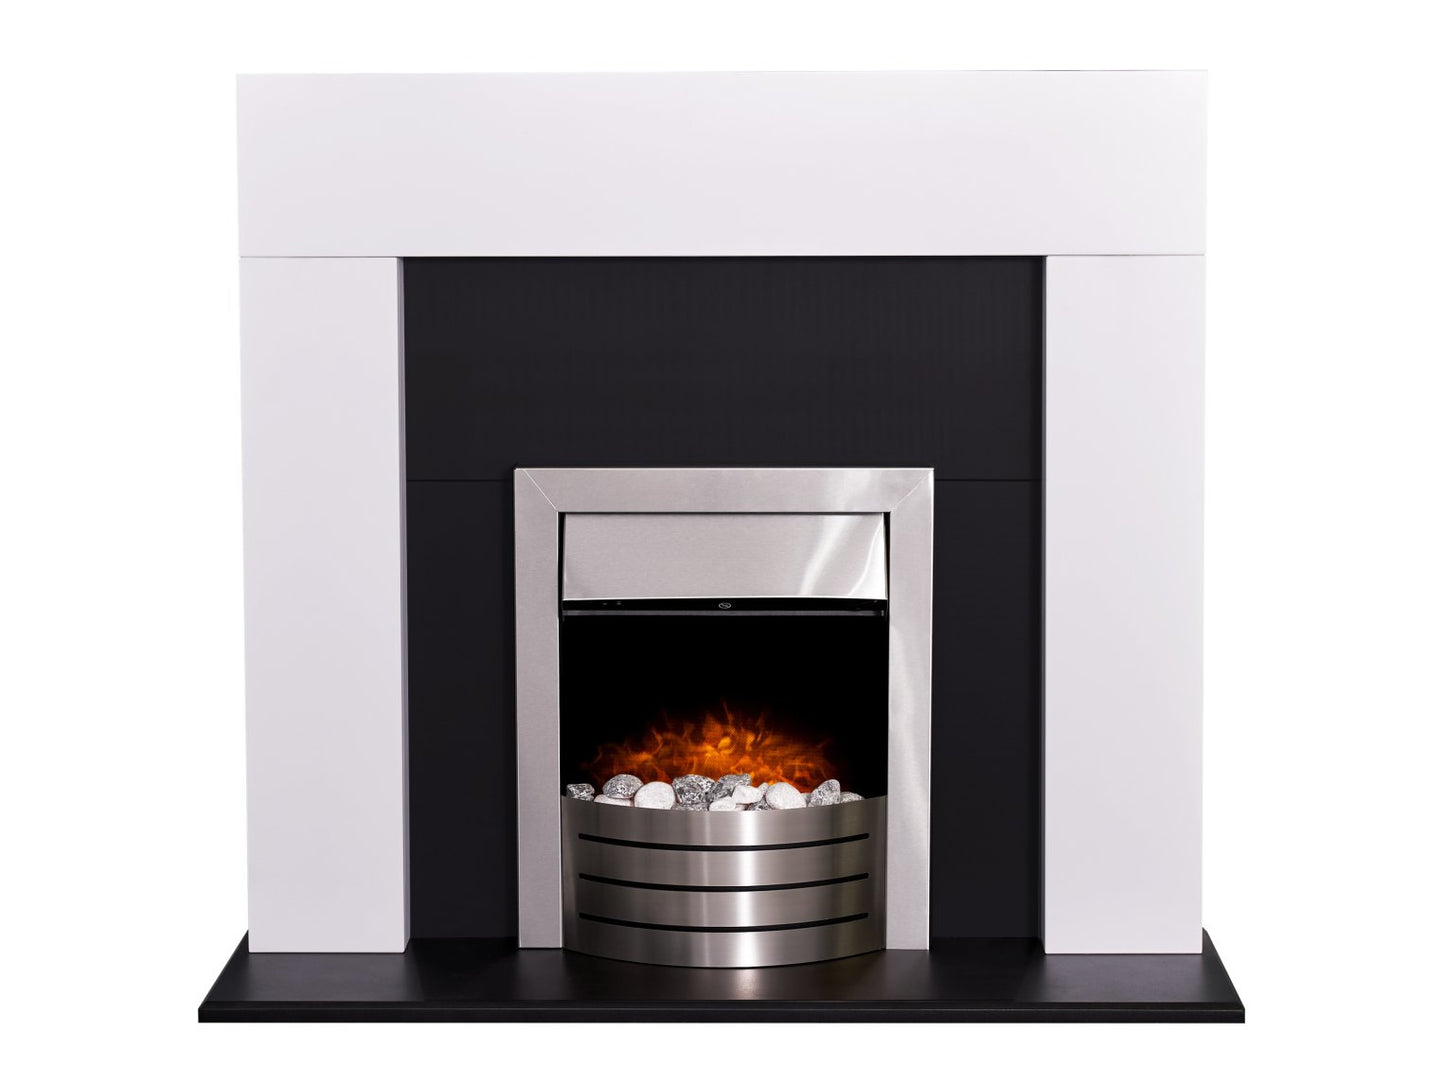 Adam Miami Fireplace in Pure White & Black with Comet Electric Fire in Brushed Steel, 48 Inch